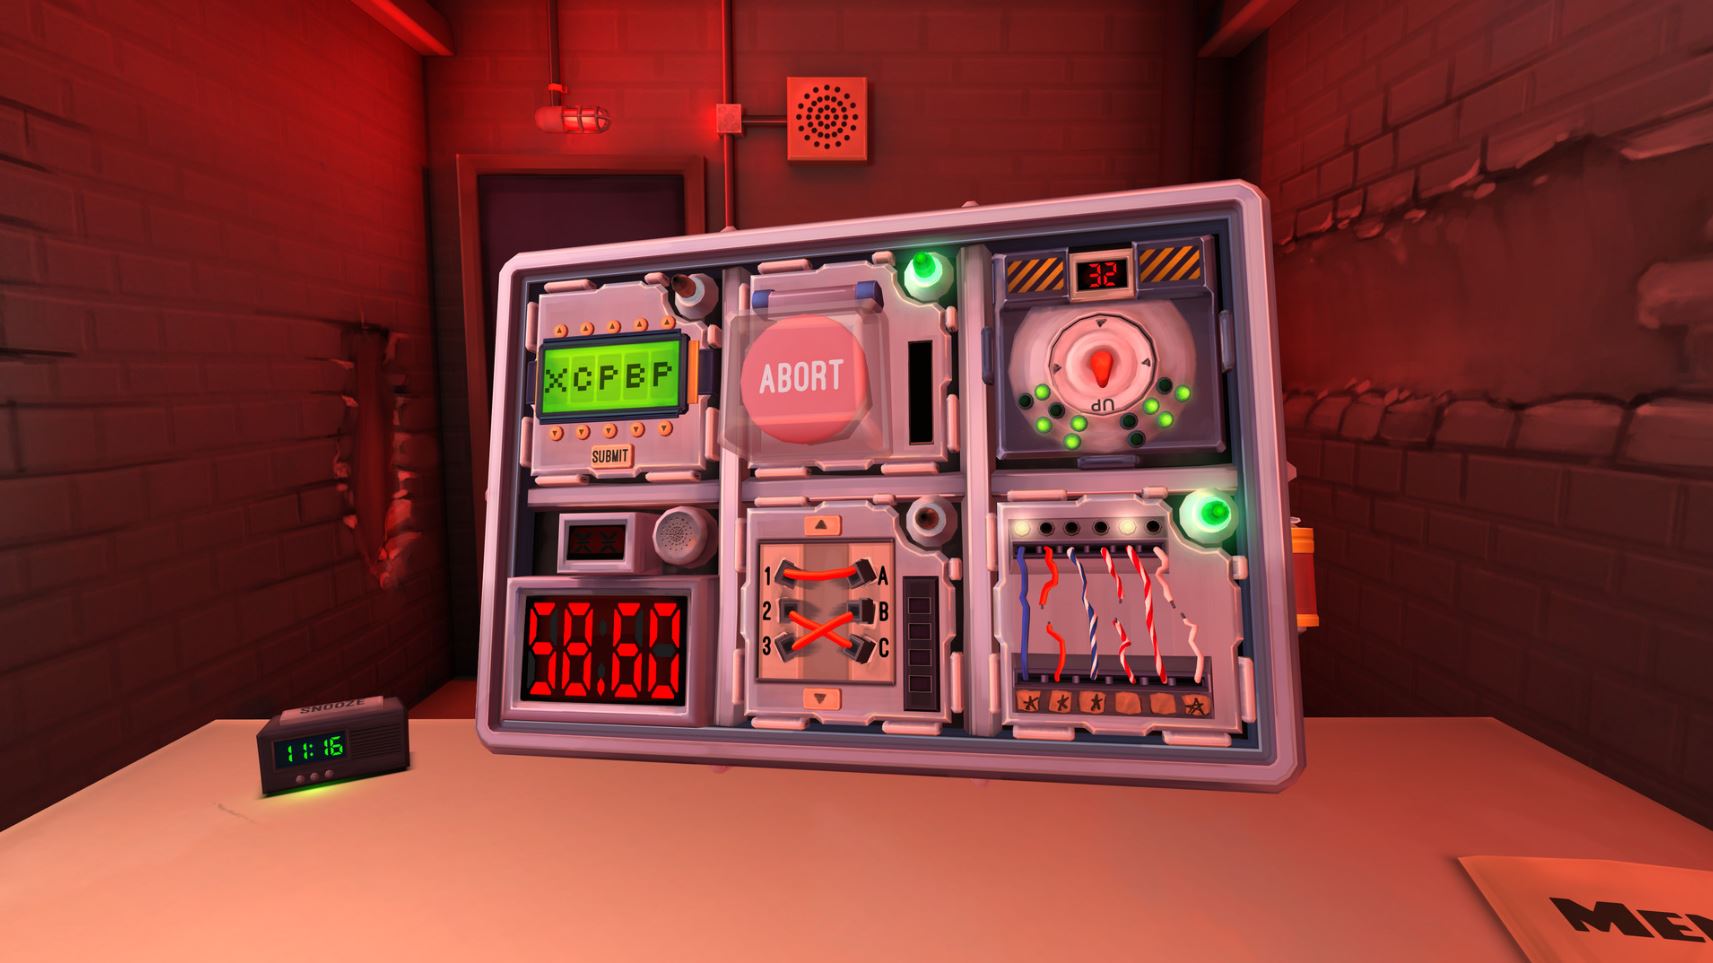 Great hilarious puzzle game about defusing bombs